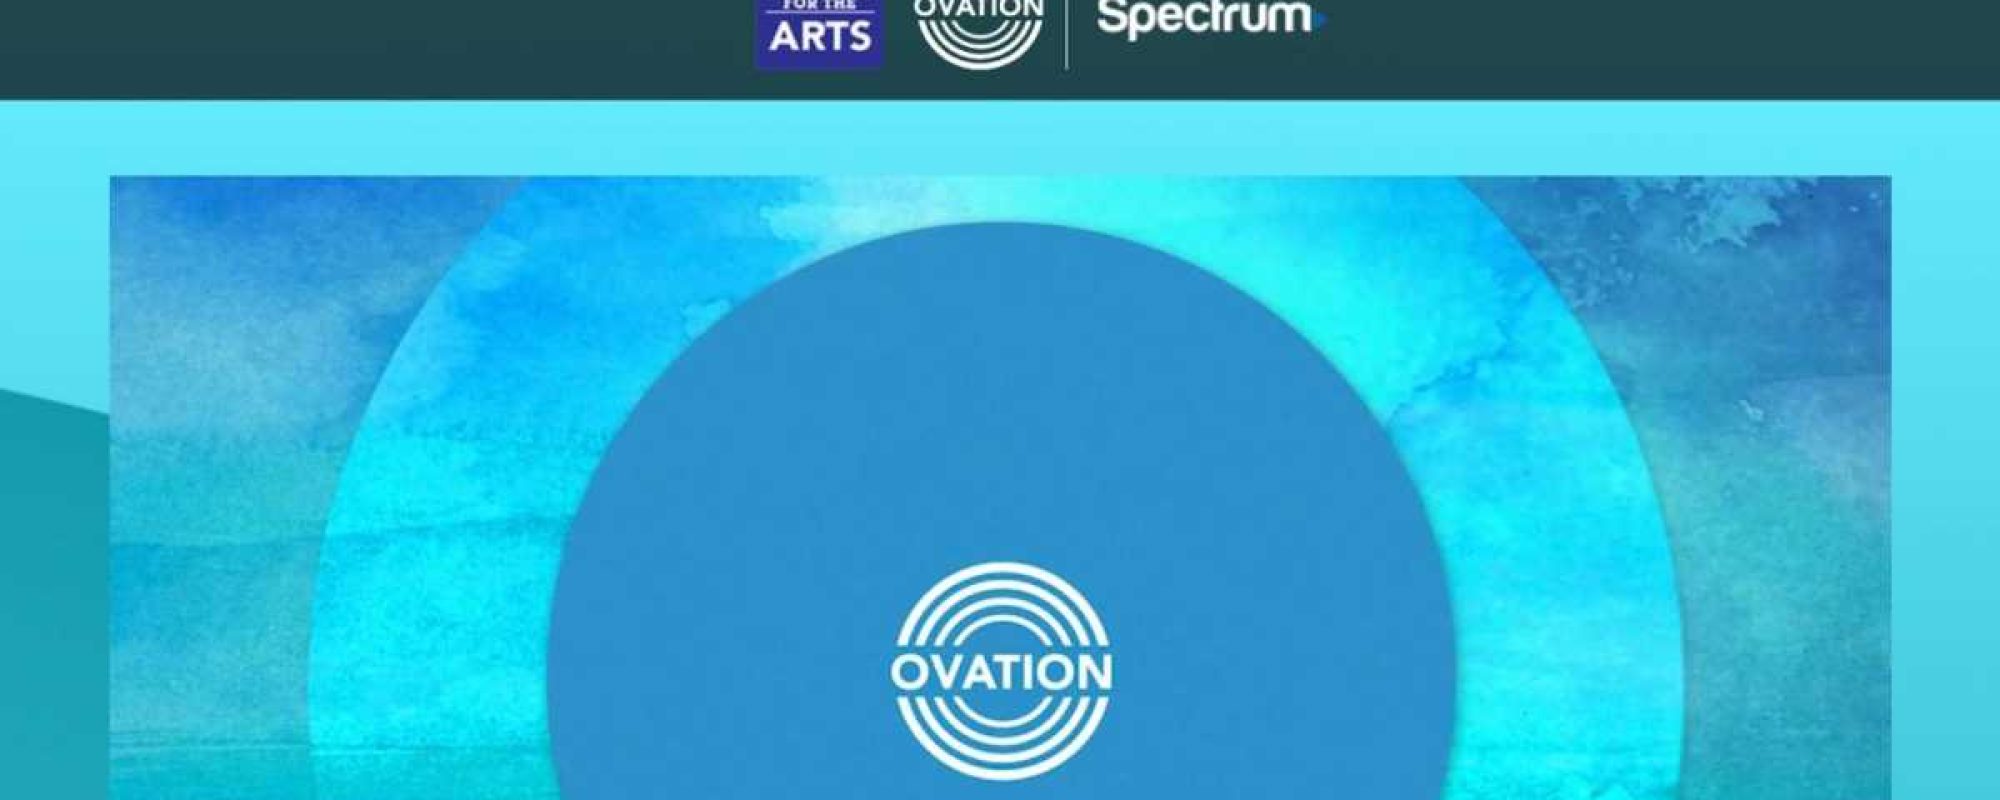 OVATION AND SPECTRUM ANNOUNCE STAND FOR THE ARTS AWARDS PARTNERSHIP